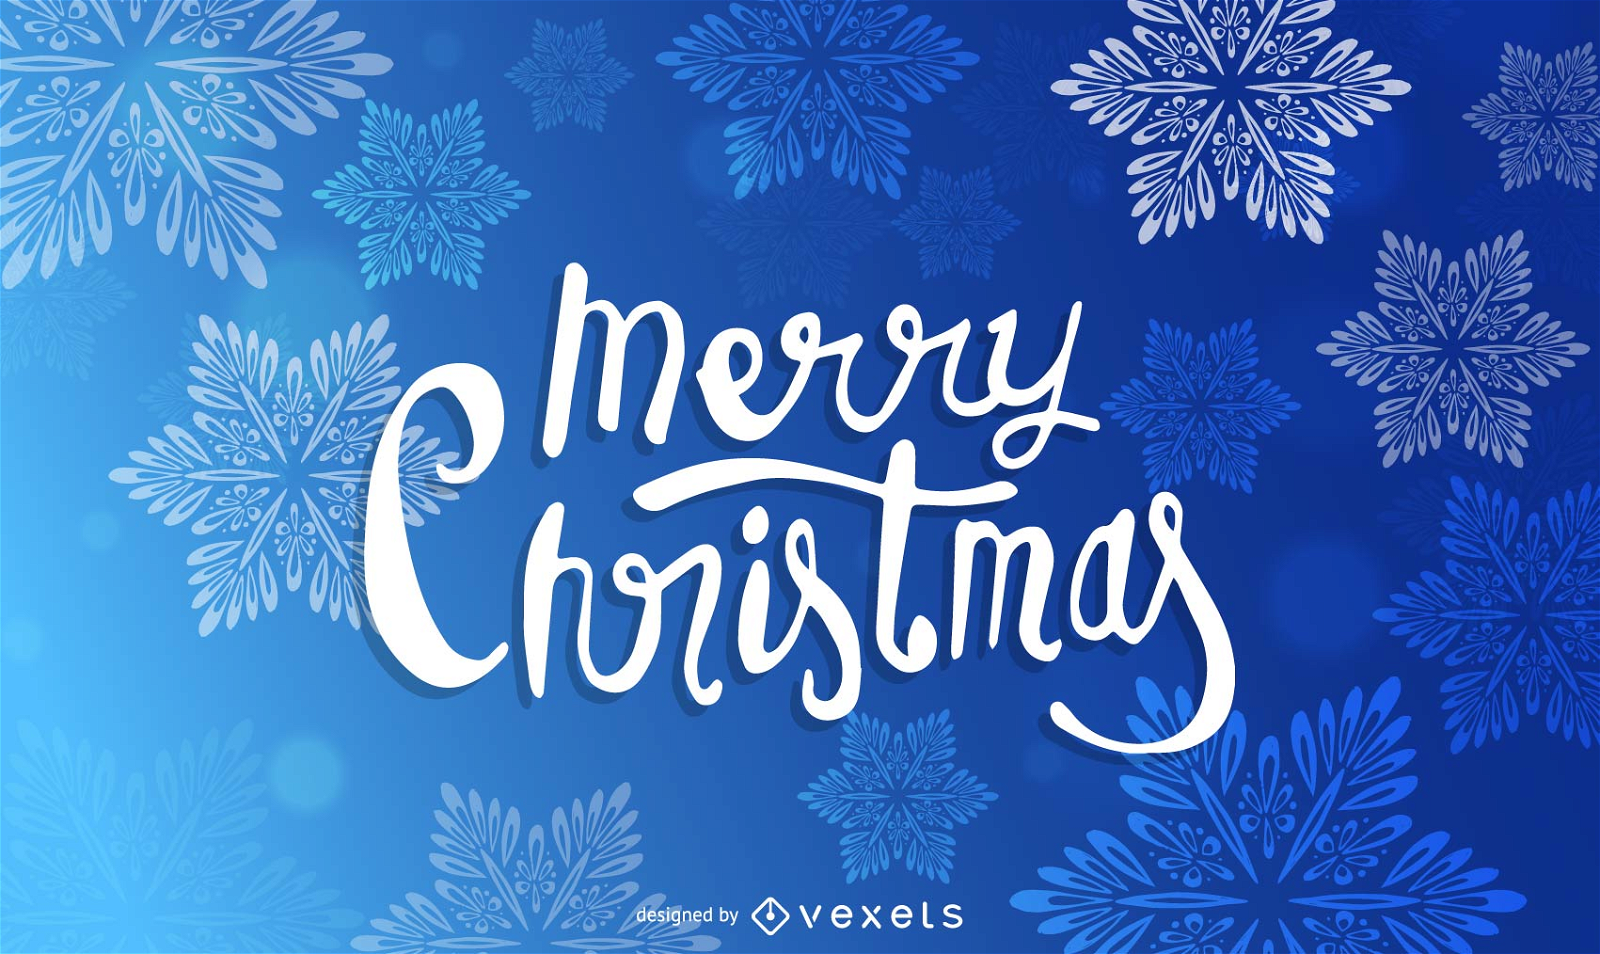 Christmas snowflake poster in blue